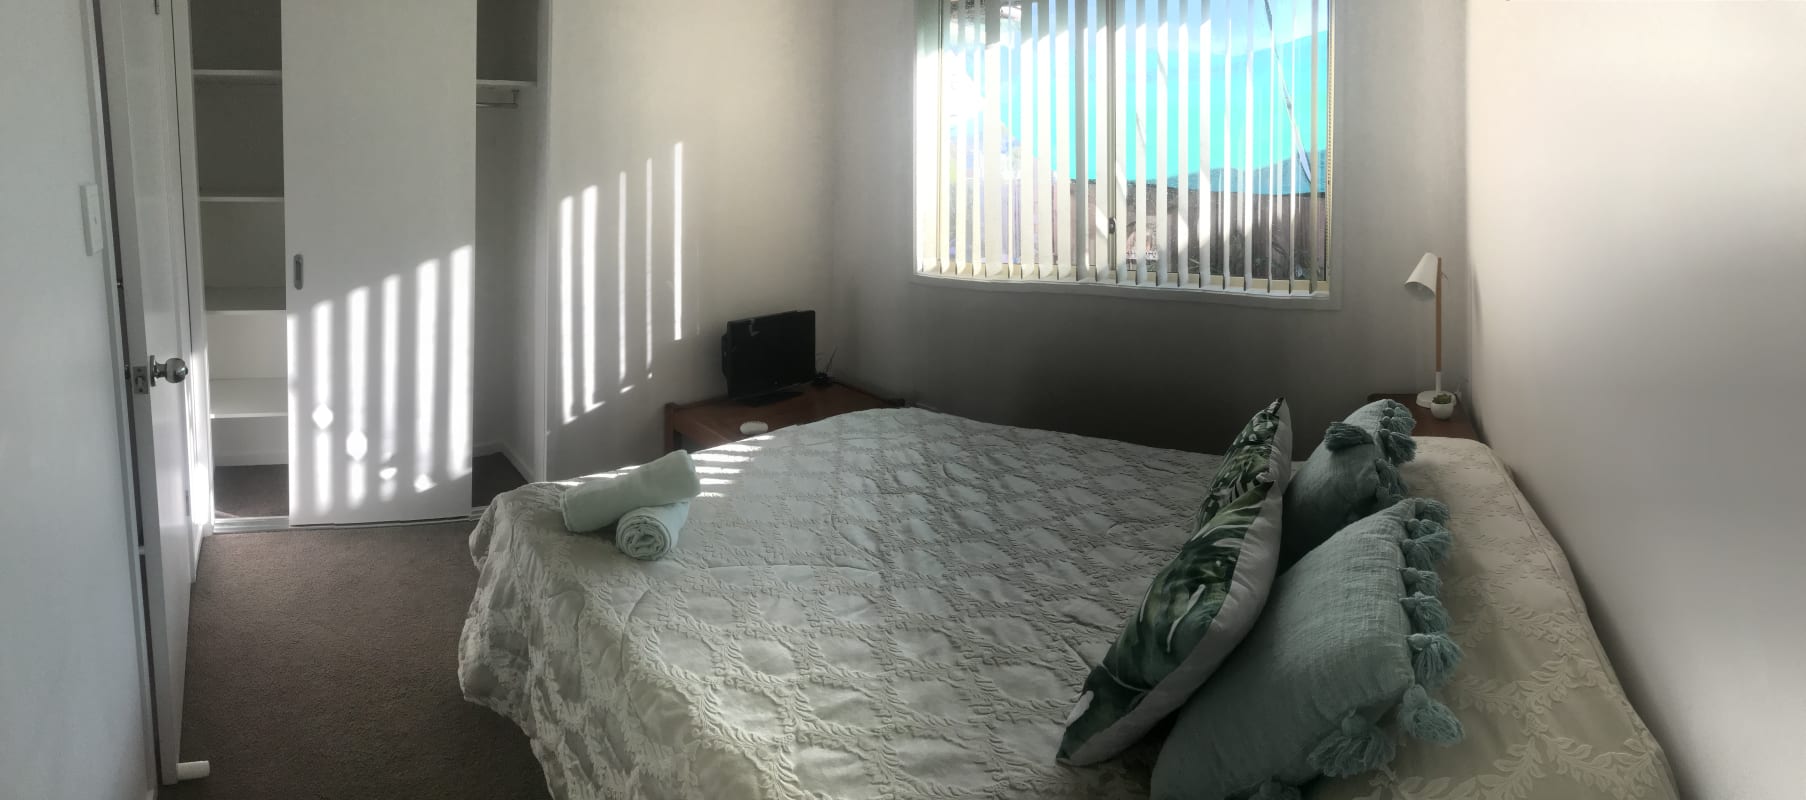 Room for Rent in Ralph Terrace, Rokeby, Hobart | $20... | Flatmates.com.au